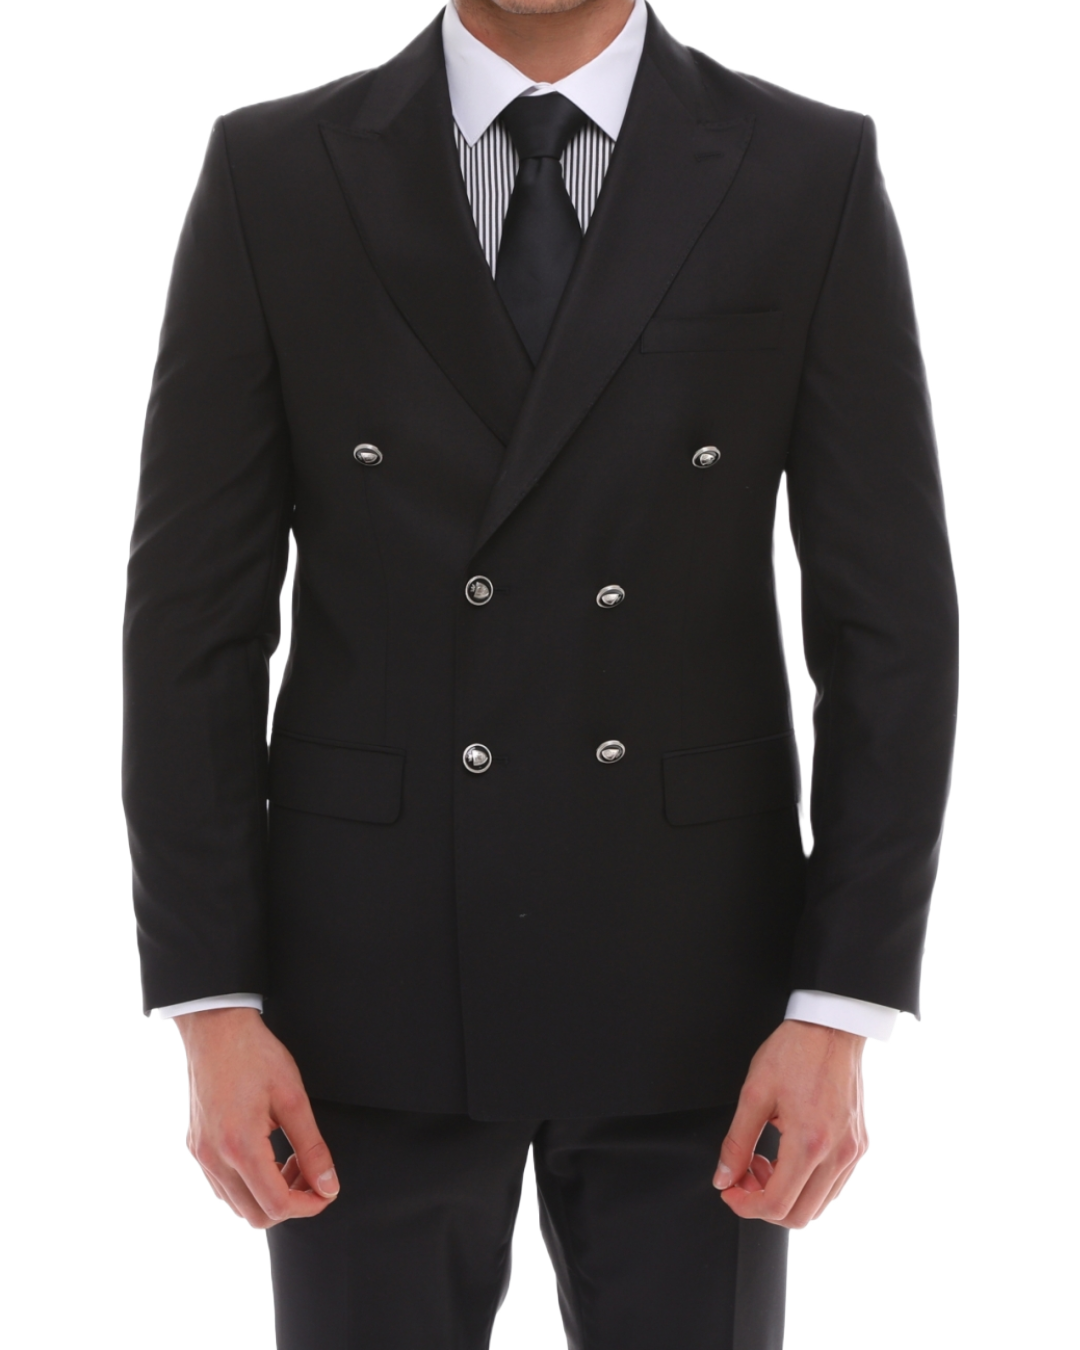 ICONIC BLACK DOUBLE - Black Double Breasted With Black Crested Buttons Suit